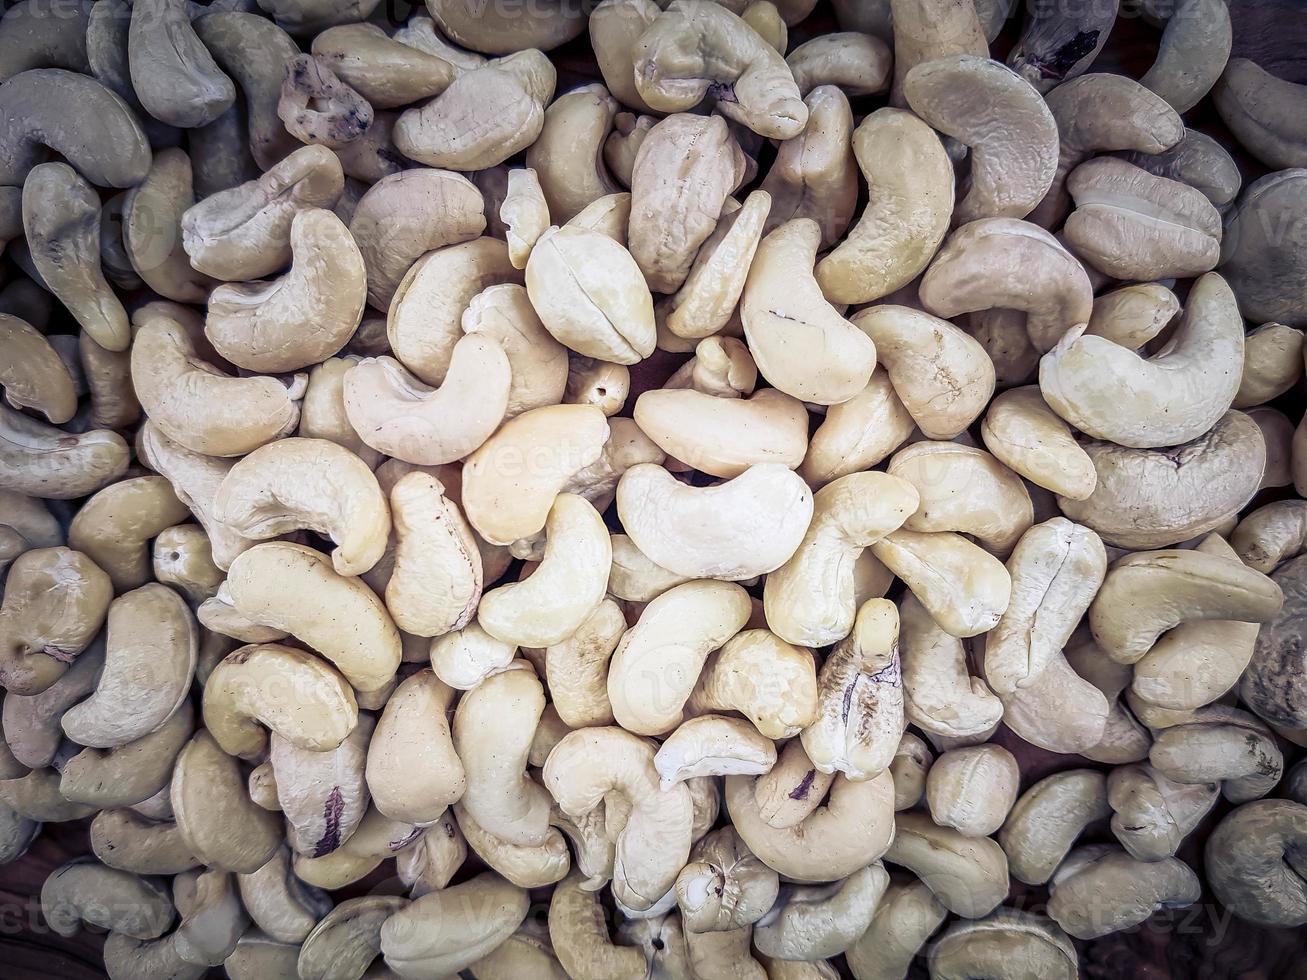 A pile of cashew nuts on olive wood photo